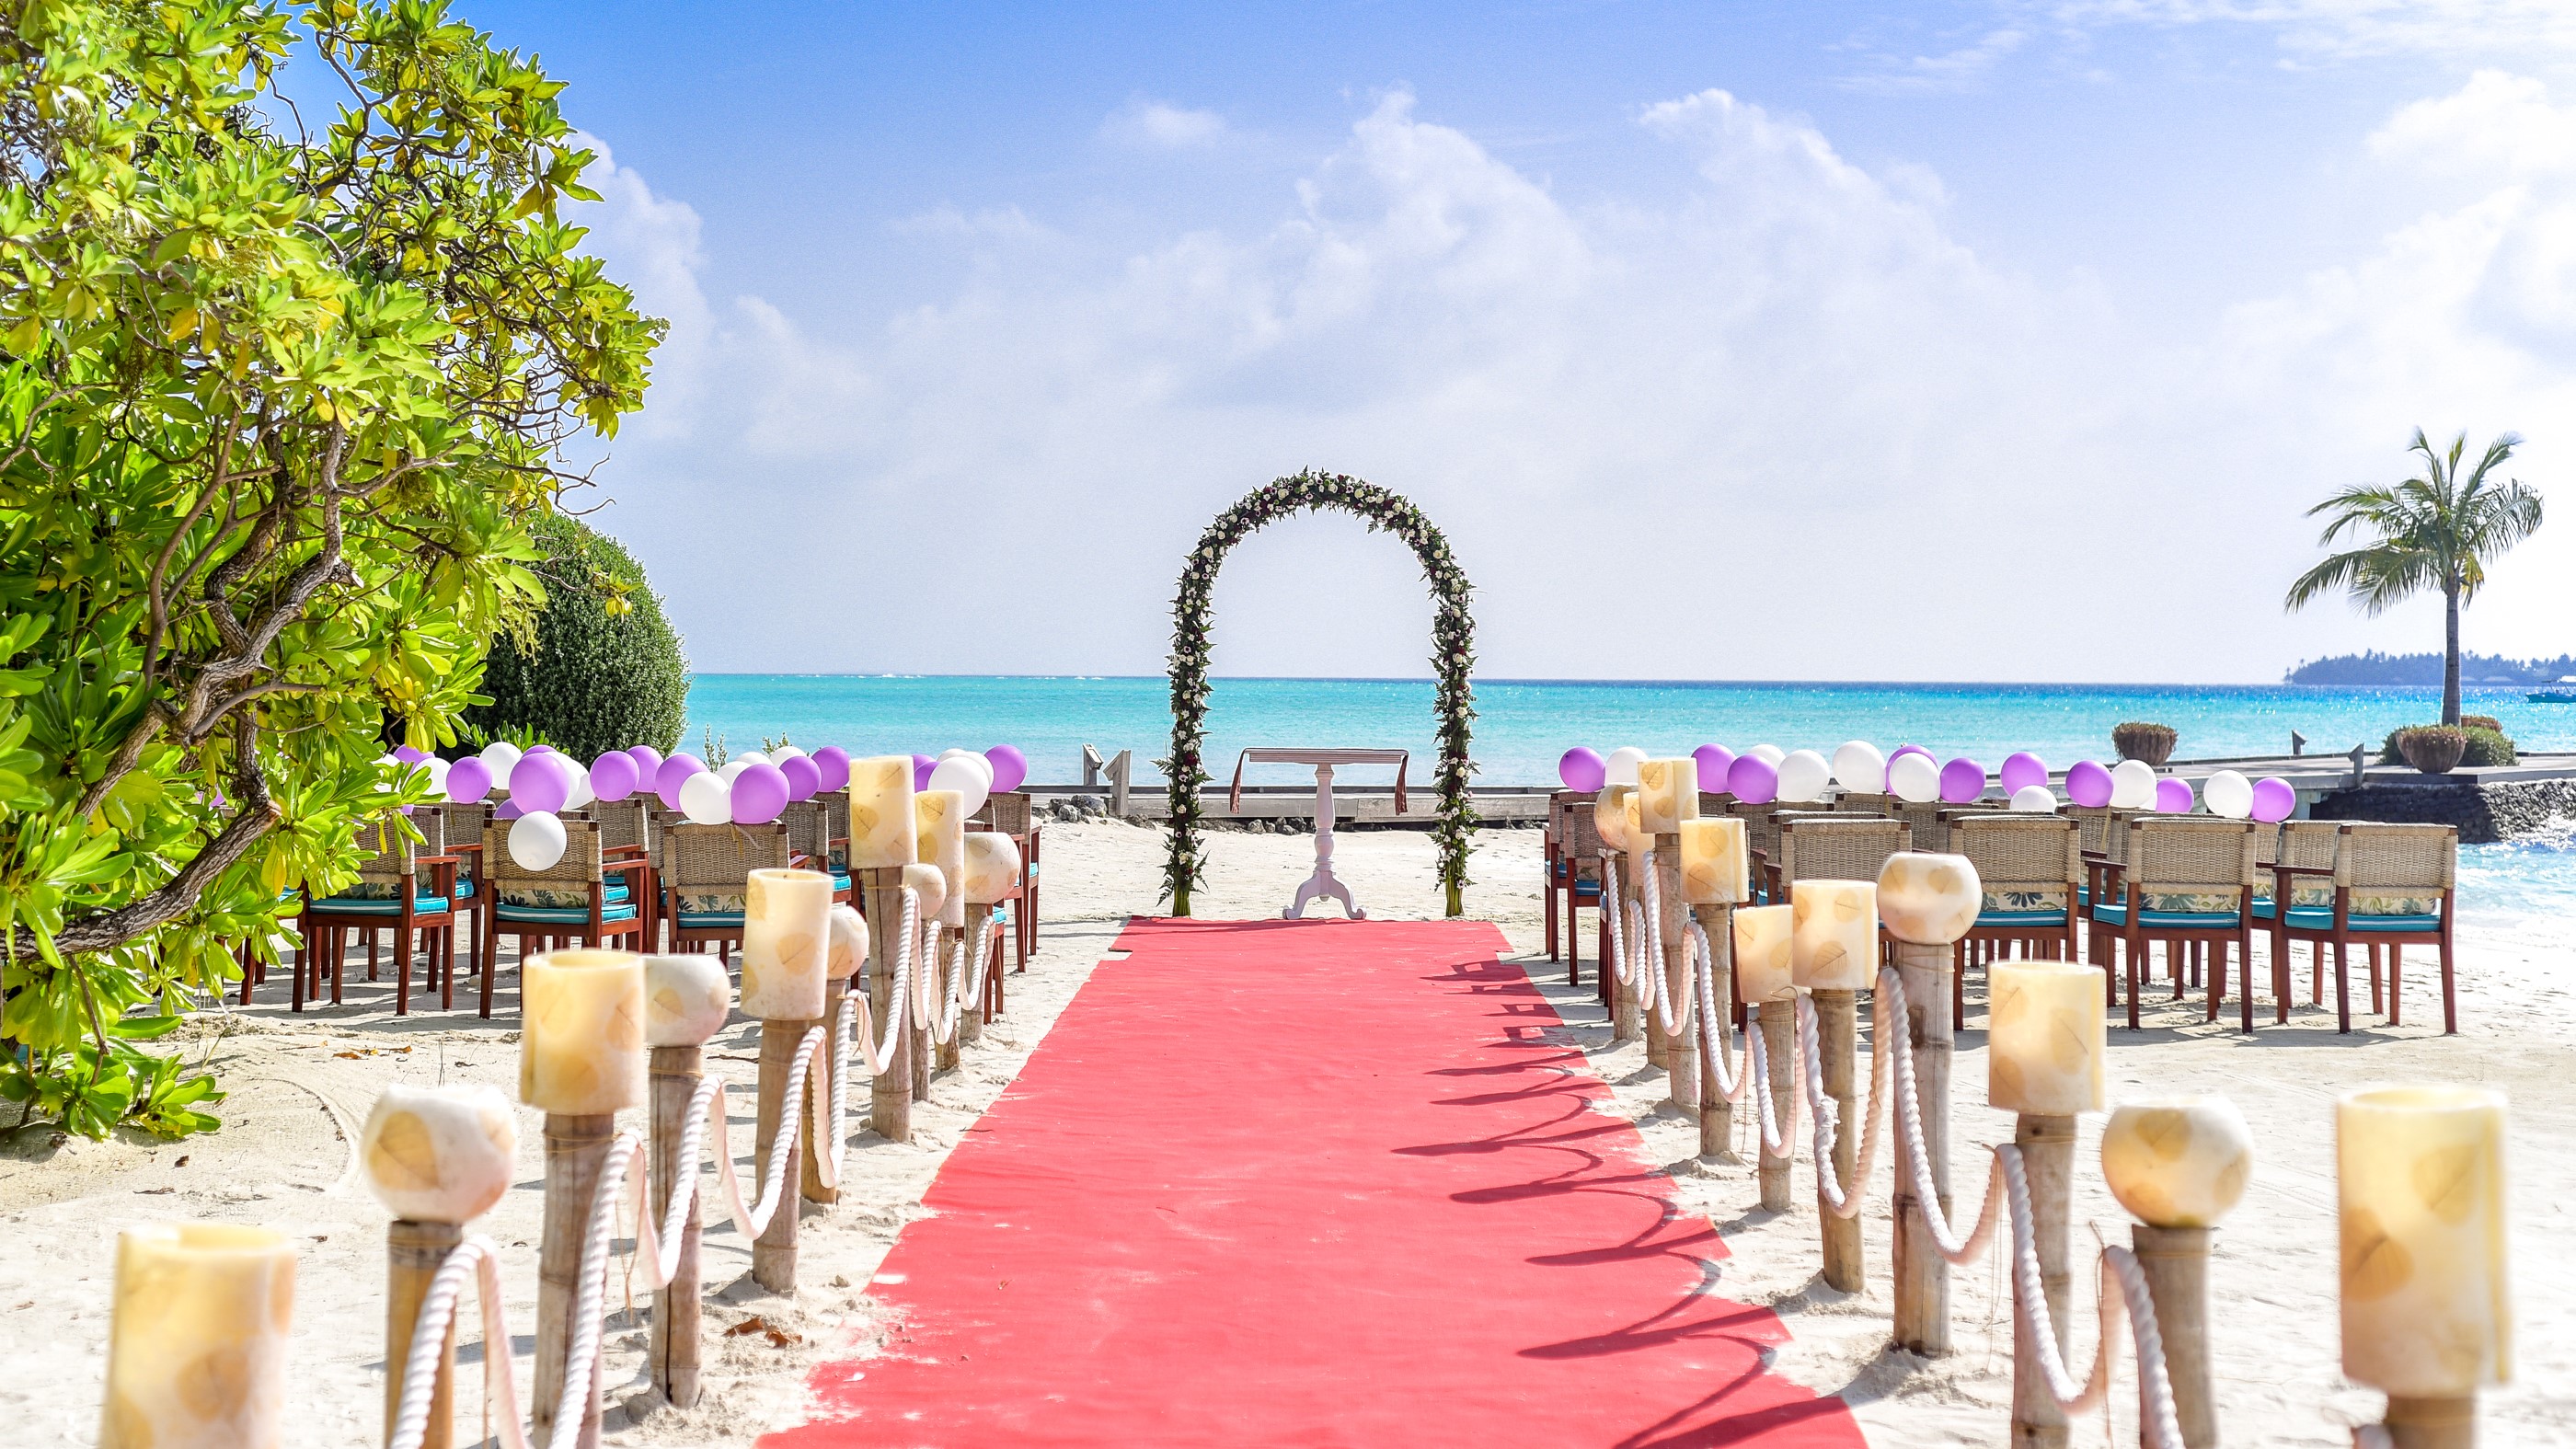 Let's Run Away: 7 Tips For How to Start Planning Your Stress-Free Destination Wedding